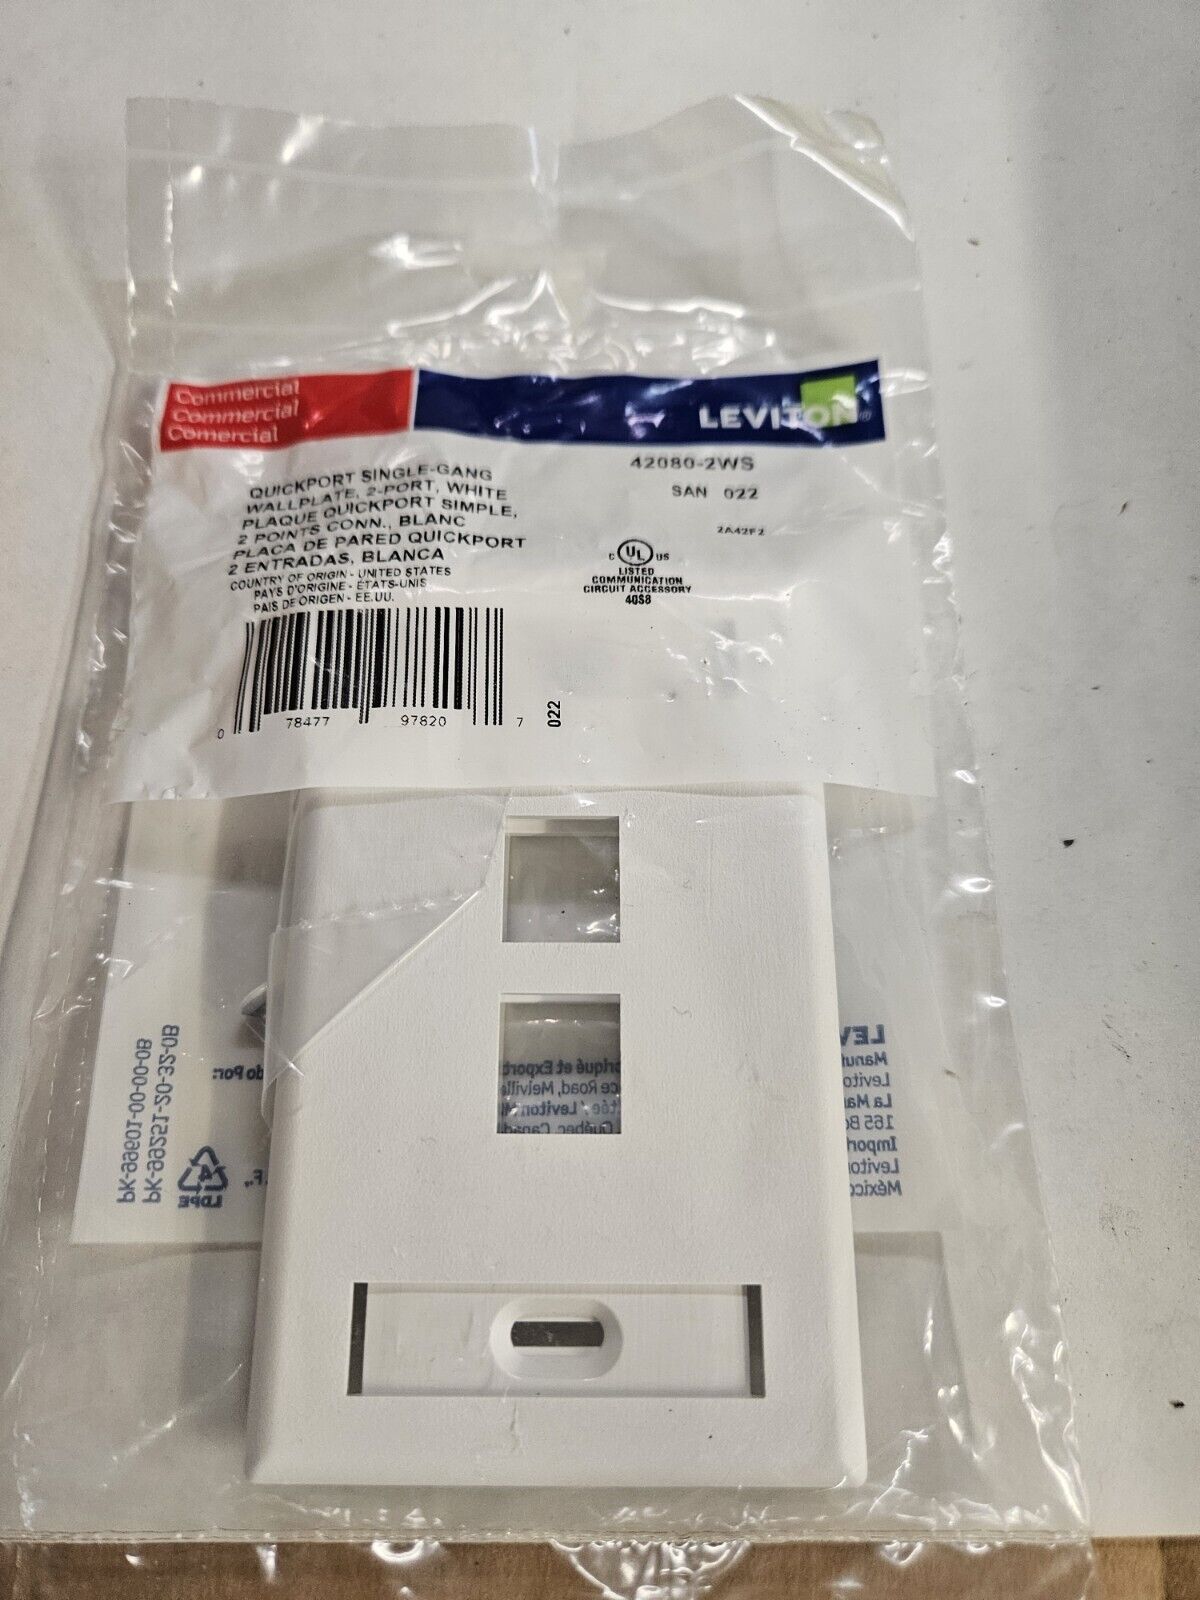 New 42080-2WS 2-Port 1-Gang QuickPort Wallplate with ID Window, White 